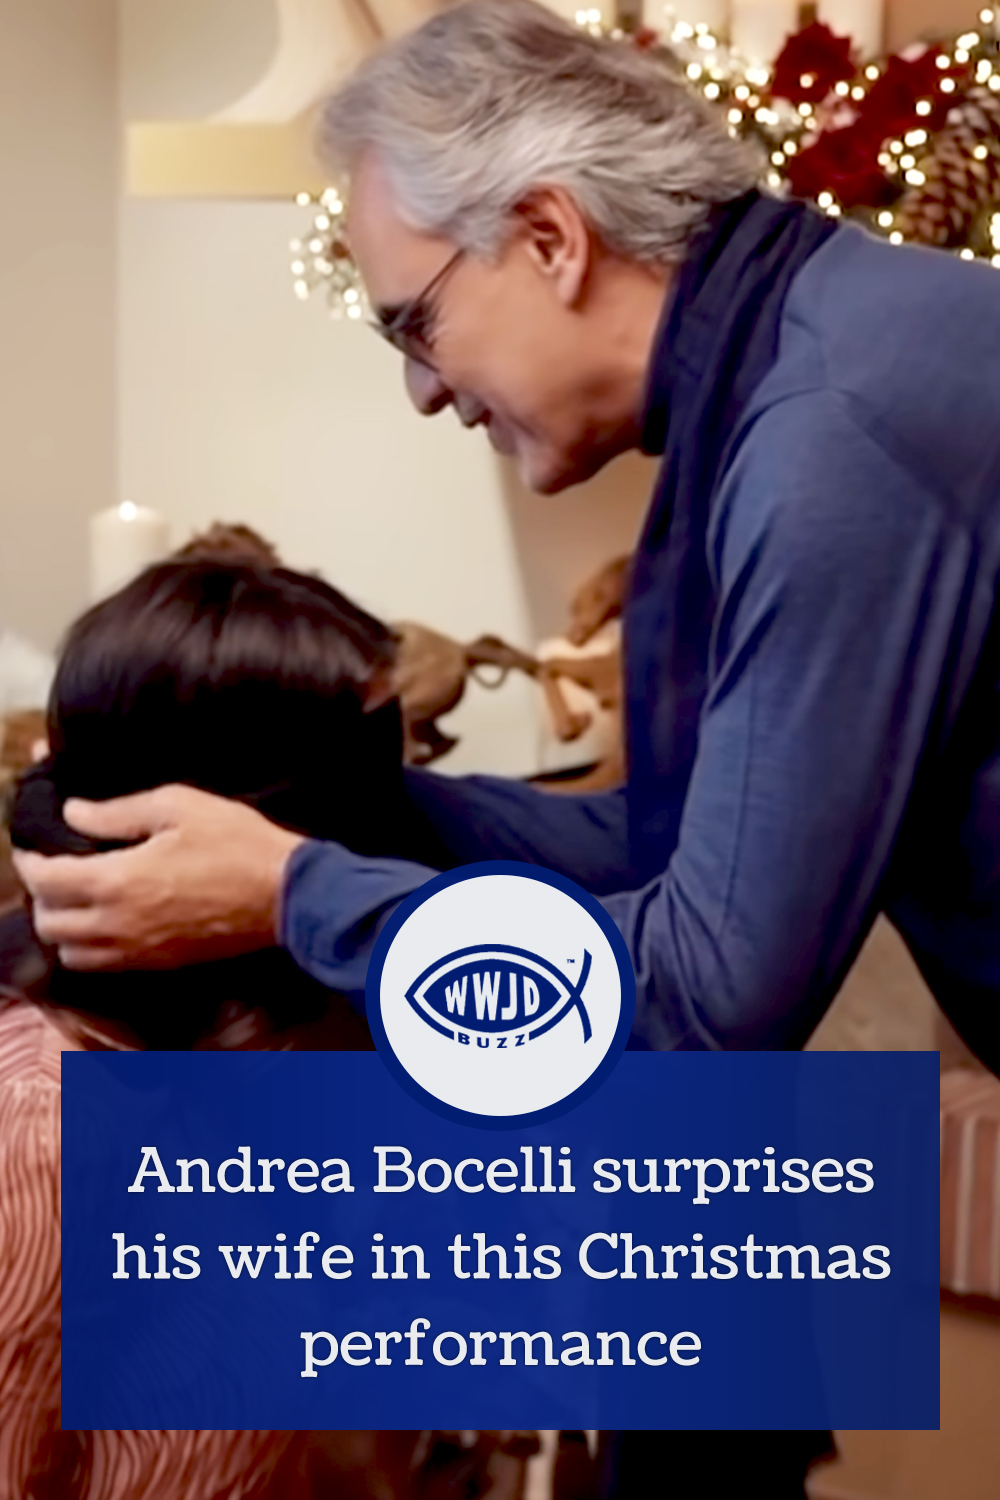 Andrea Bocelli surprises his wife in this Christmas performance